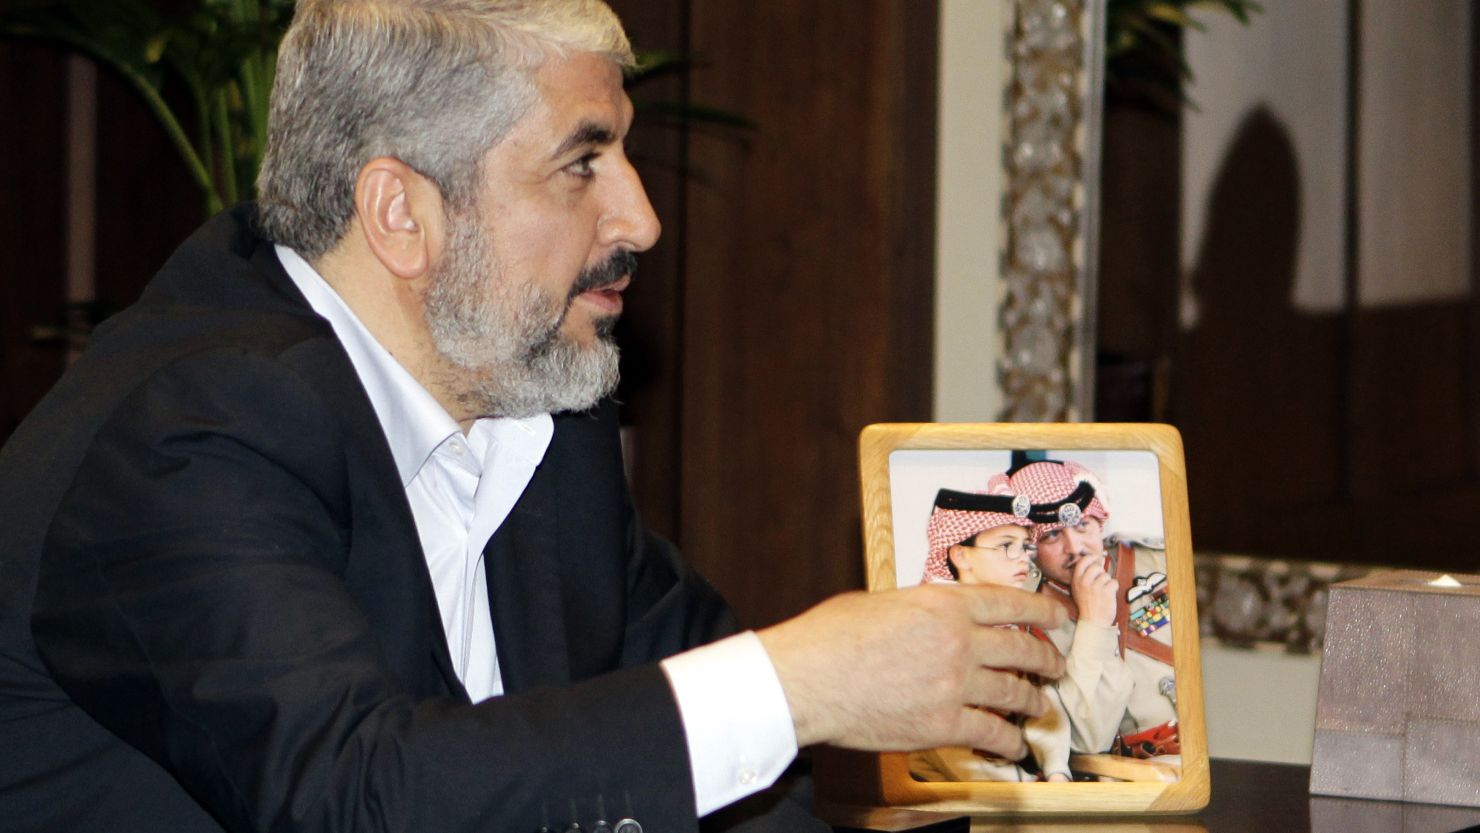 Hamas leader Khaled Meshaal is shown during a meeting with Jordan's King Abdullah II on Sunday in Amman.